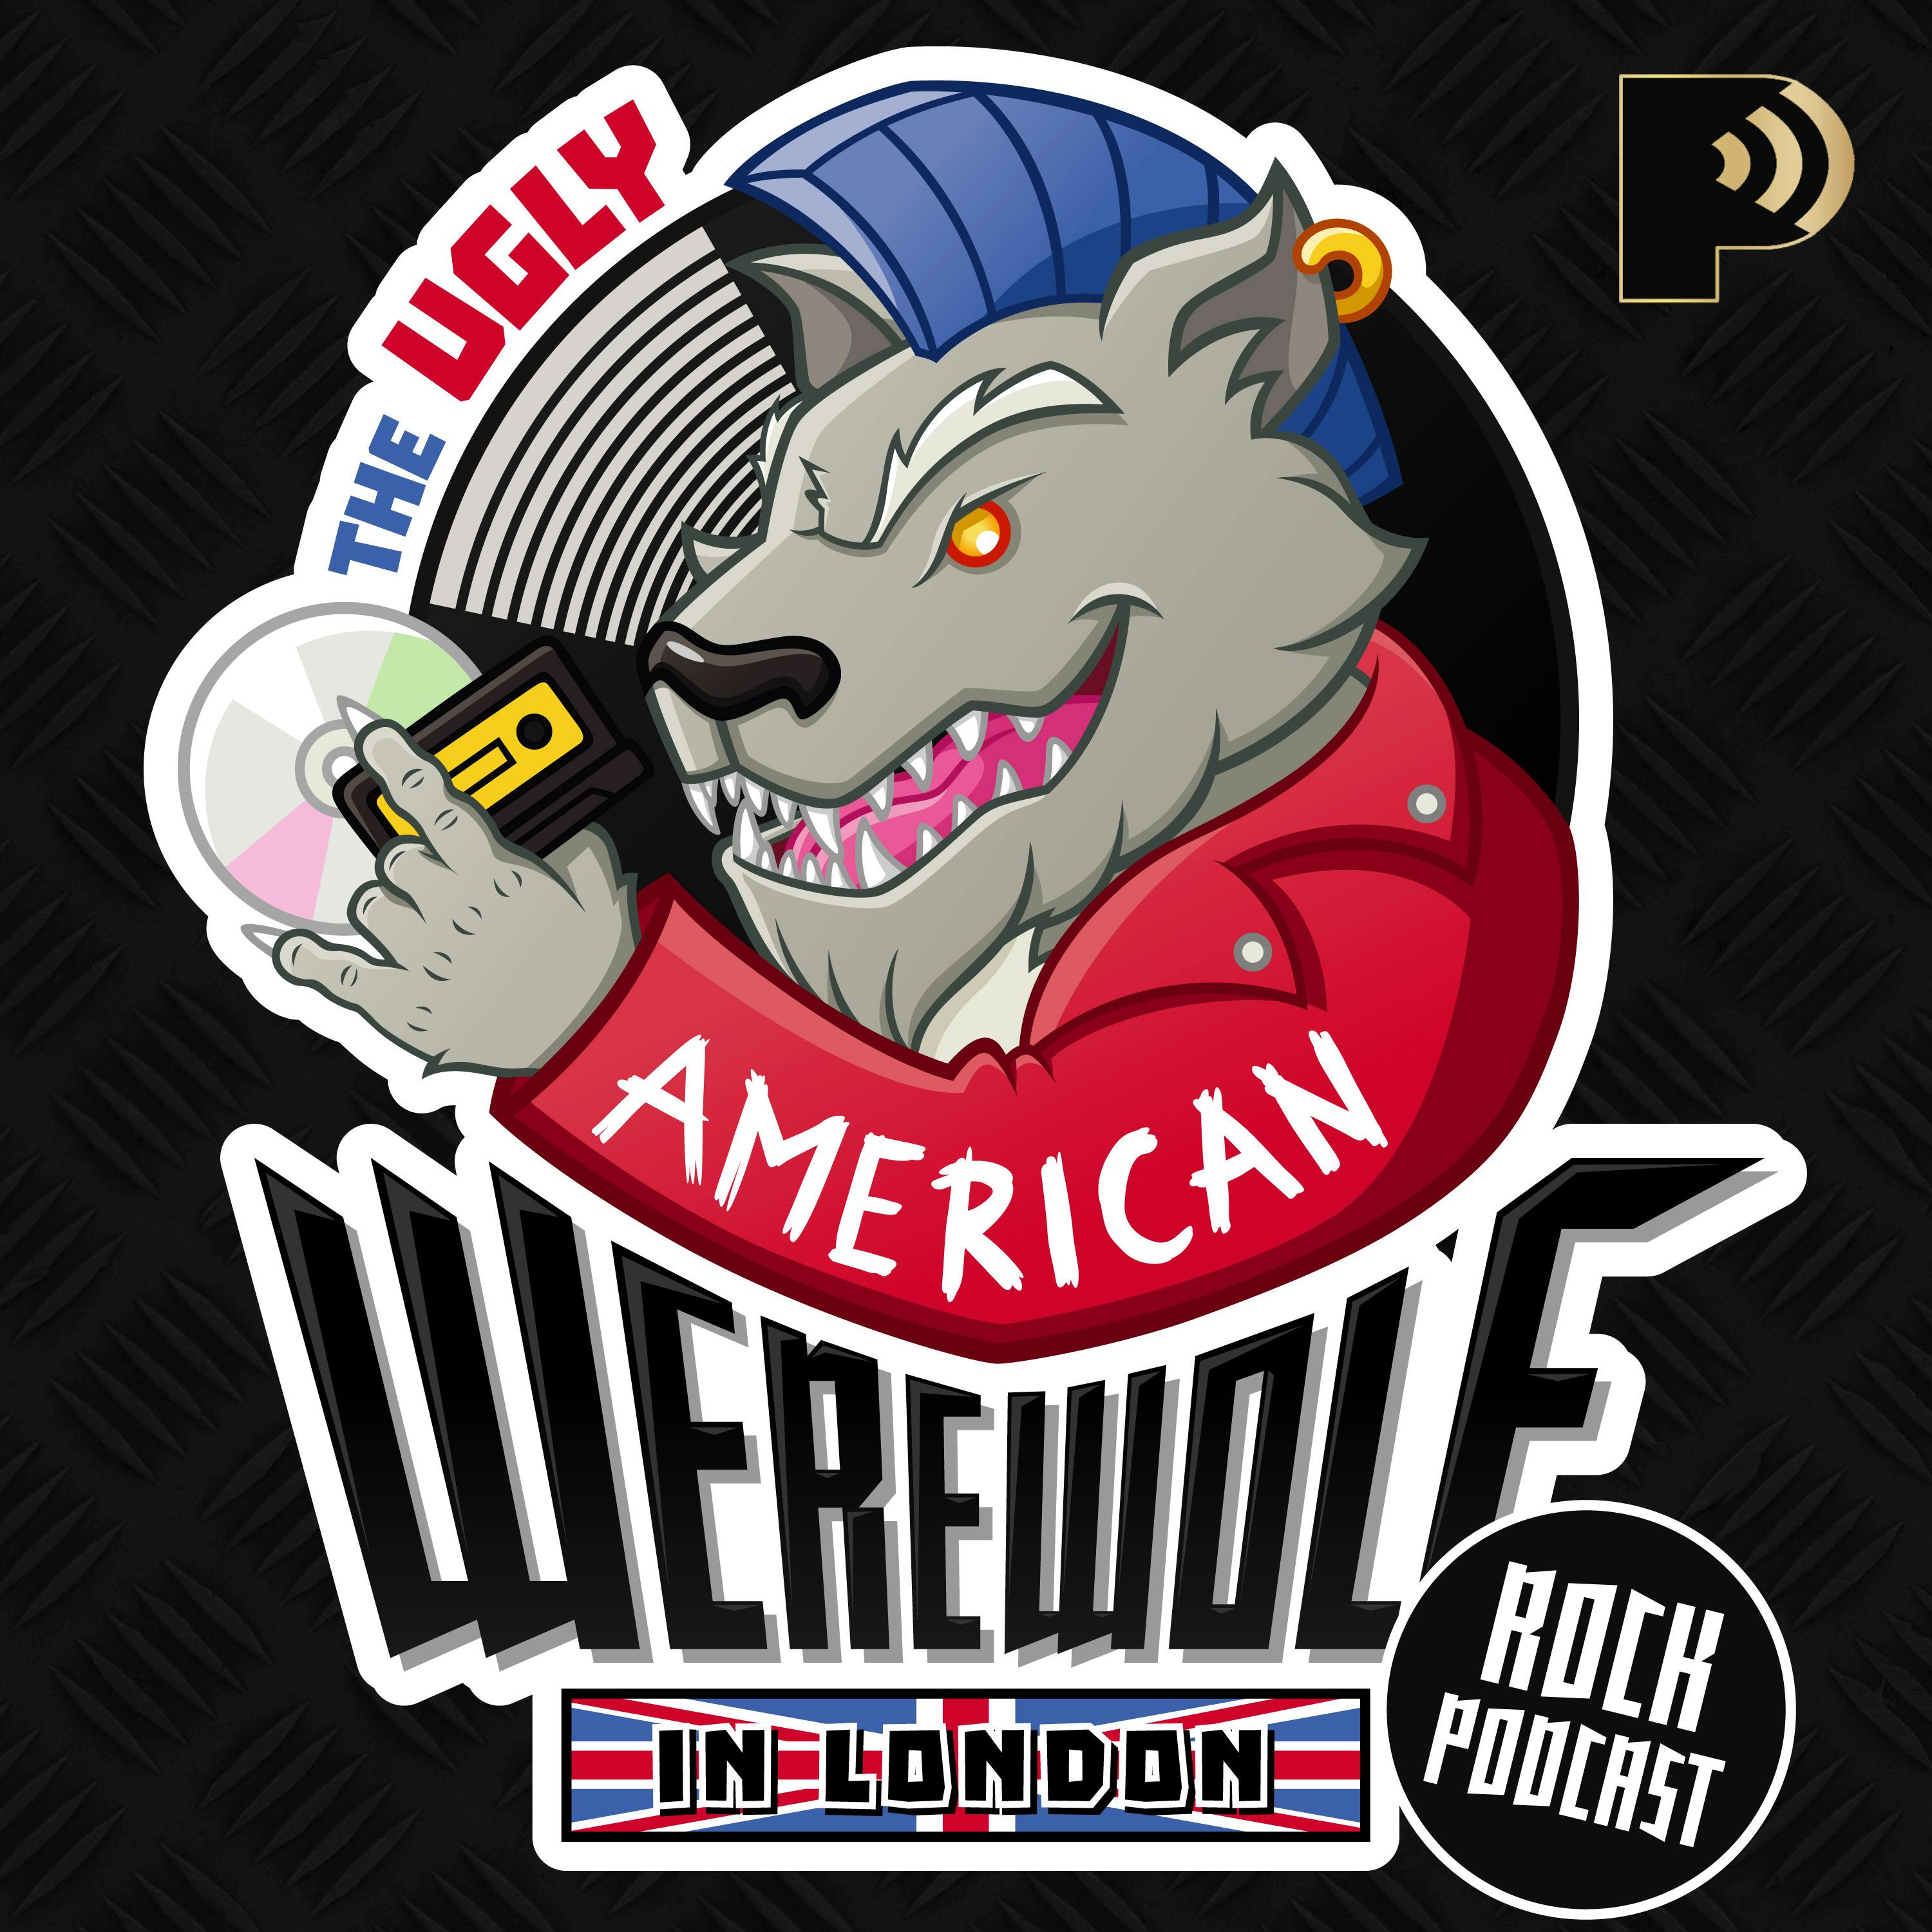 Ugly American Werewolf in London: On First Listen - Roger Waters The Pros & Cons of Hitchhiking